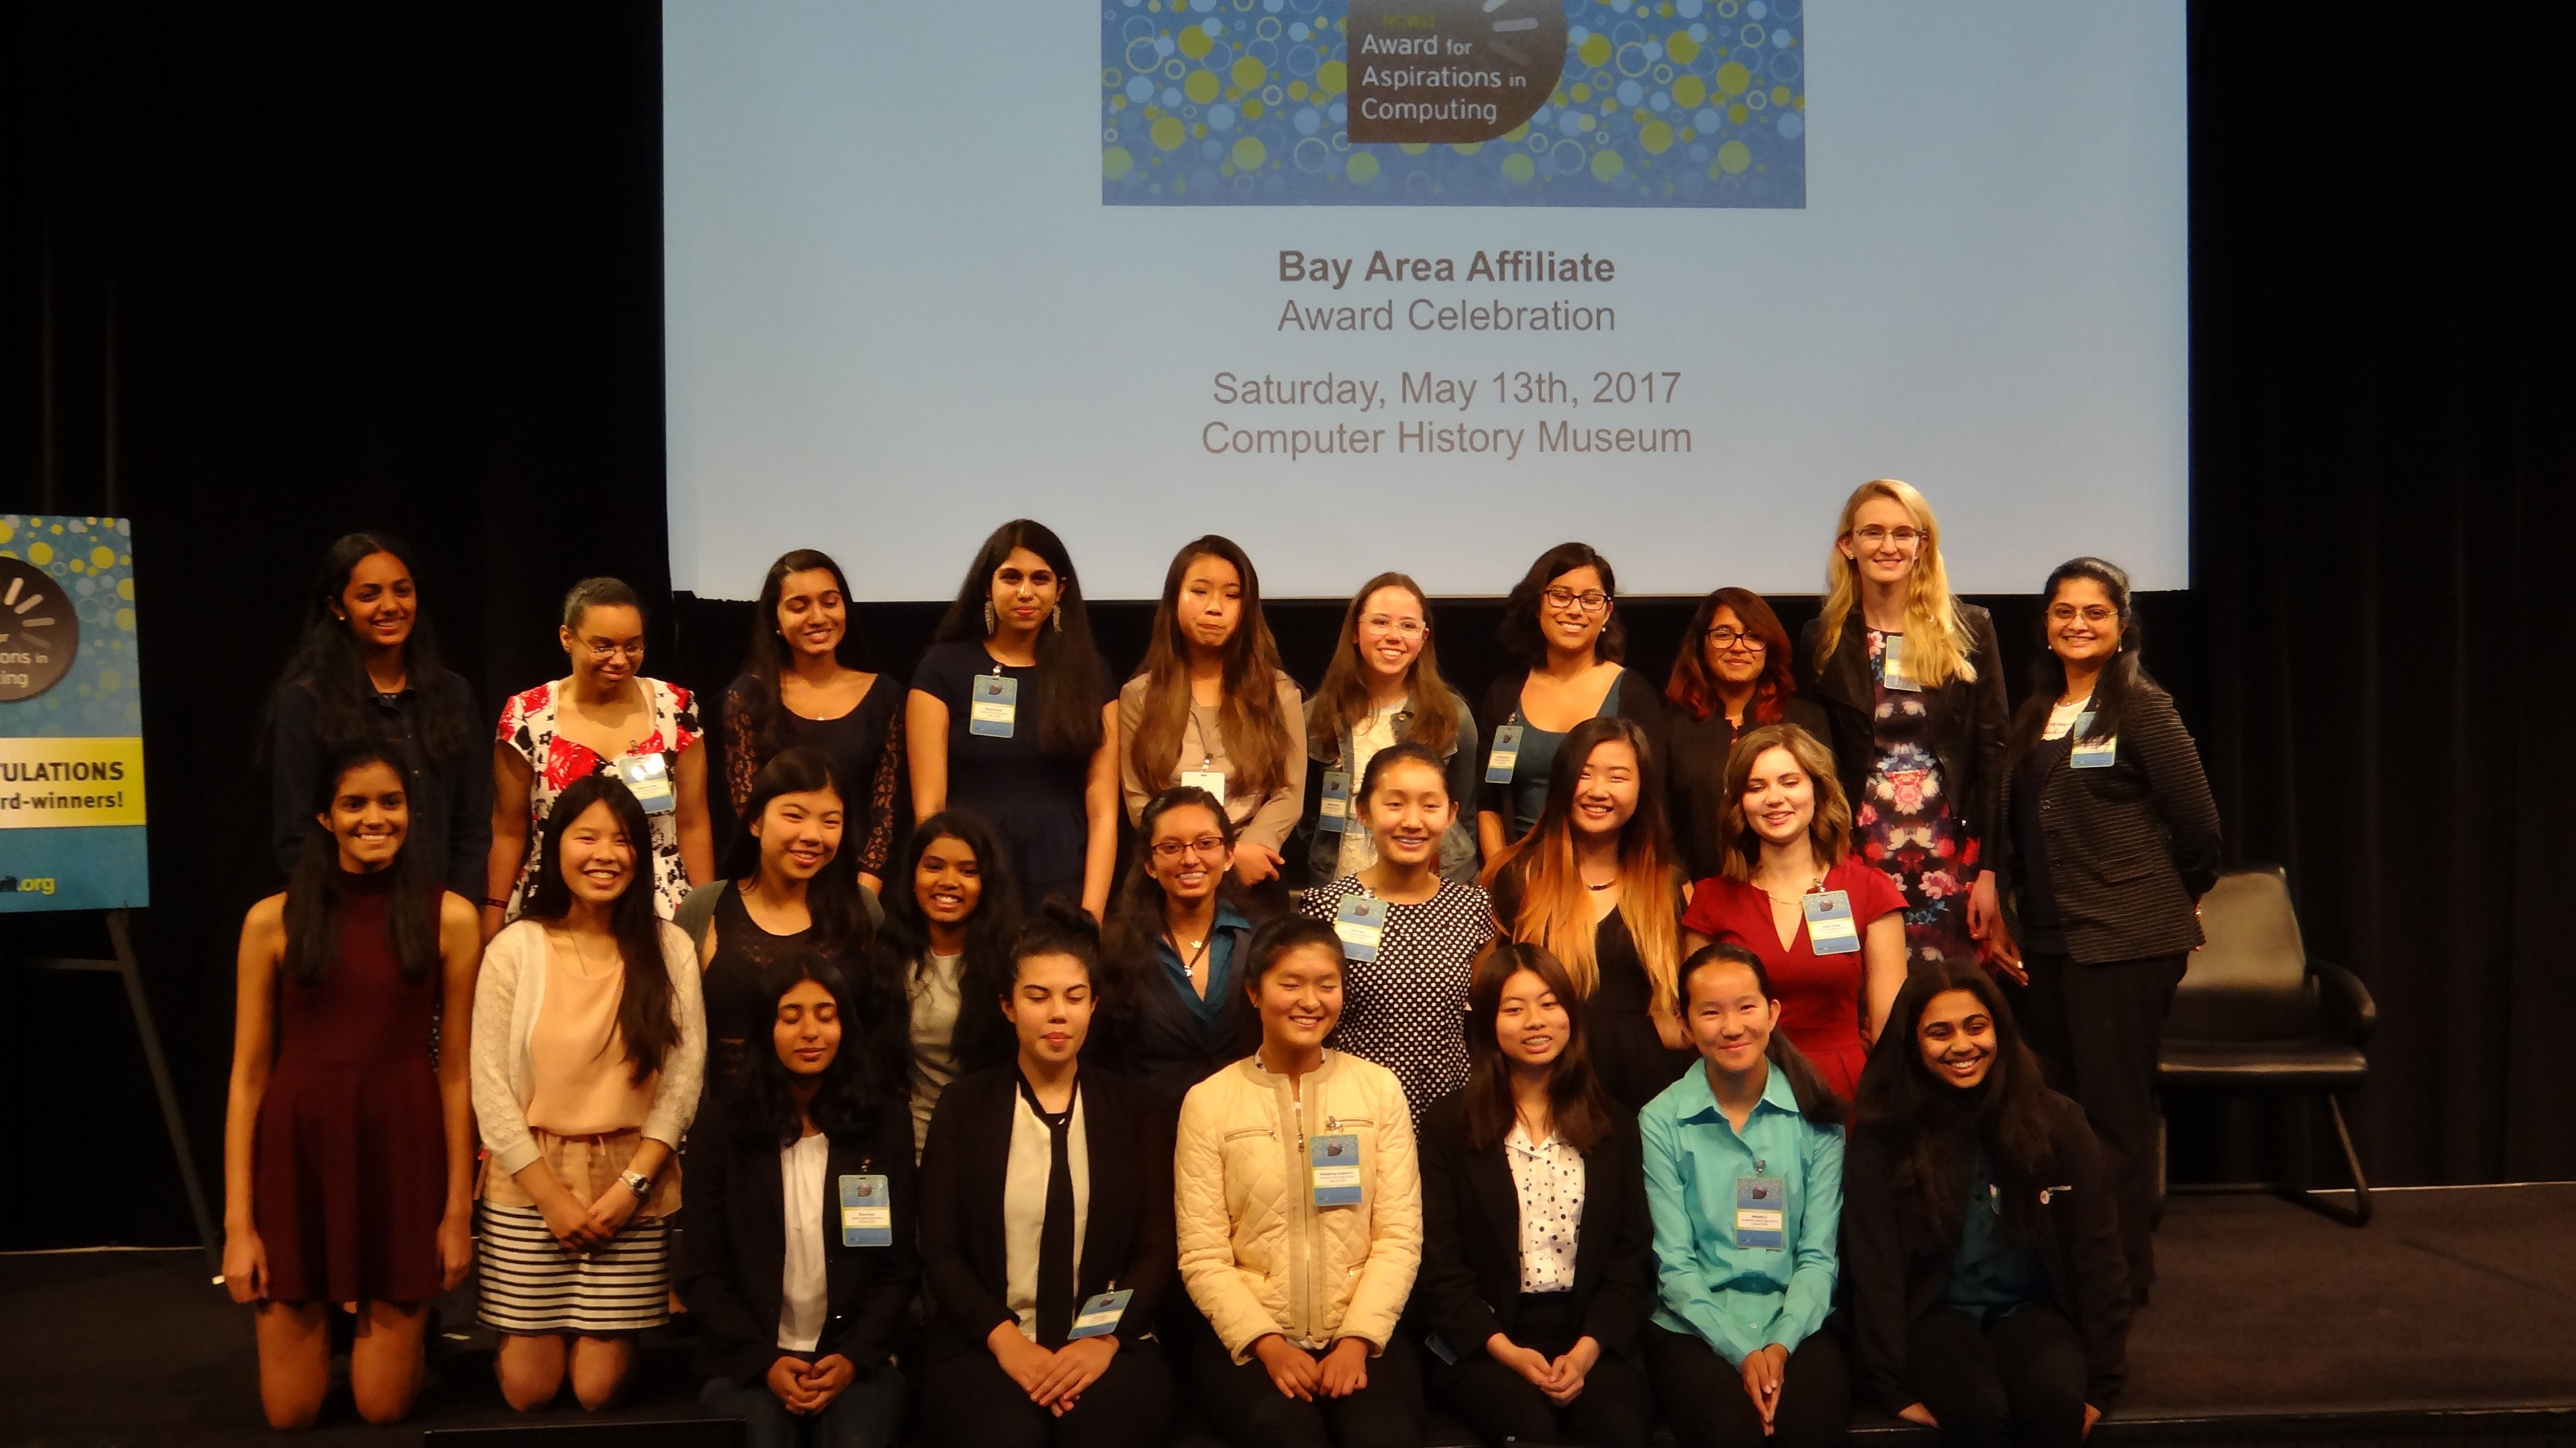 NCWIT Award for Aspirations in Computing